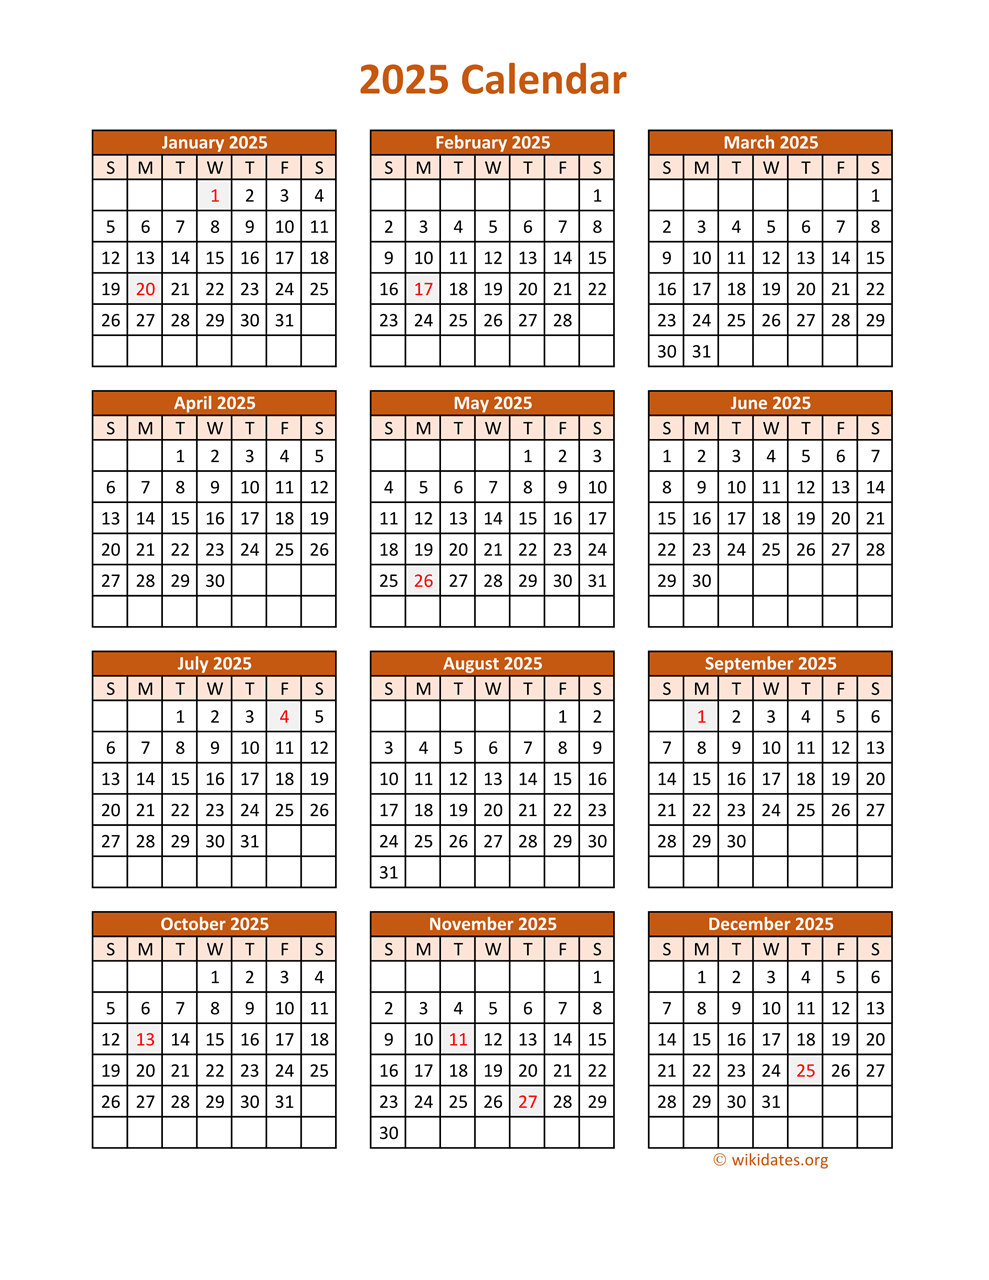 Full Year 2025 Calendar On One Page WikiDates